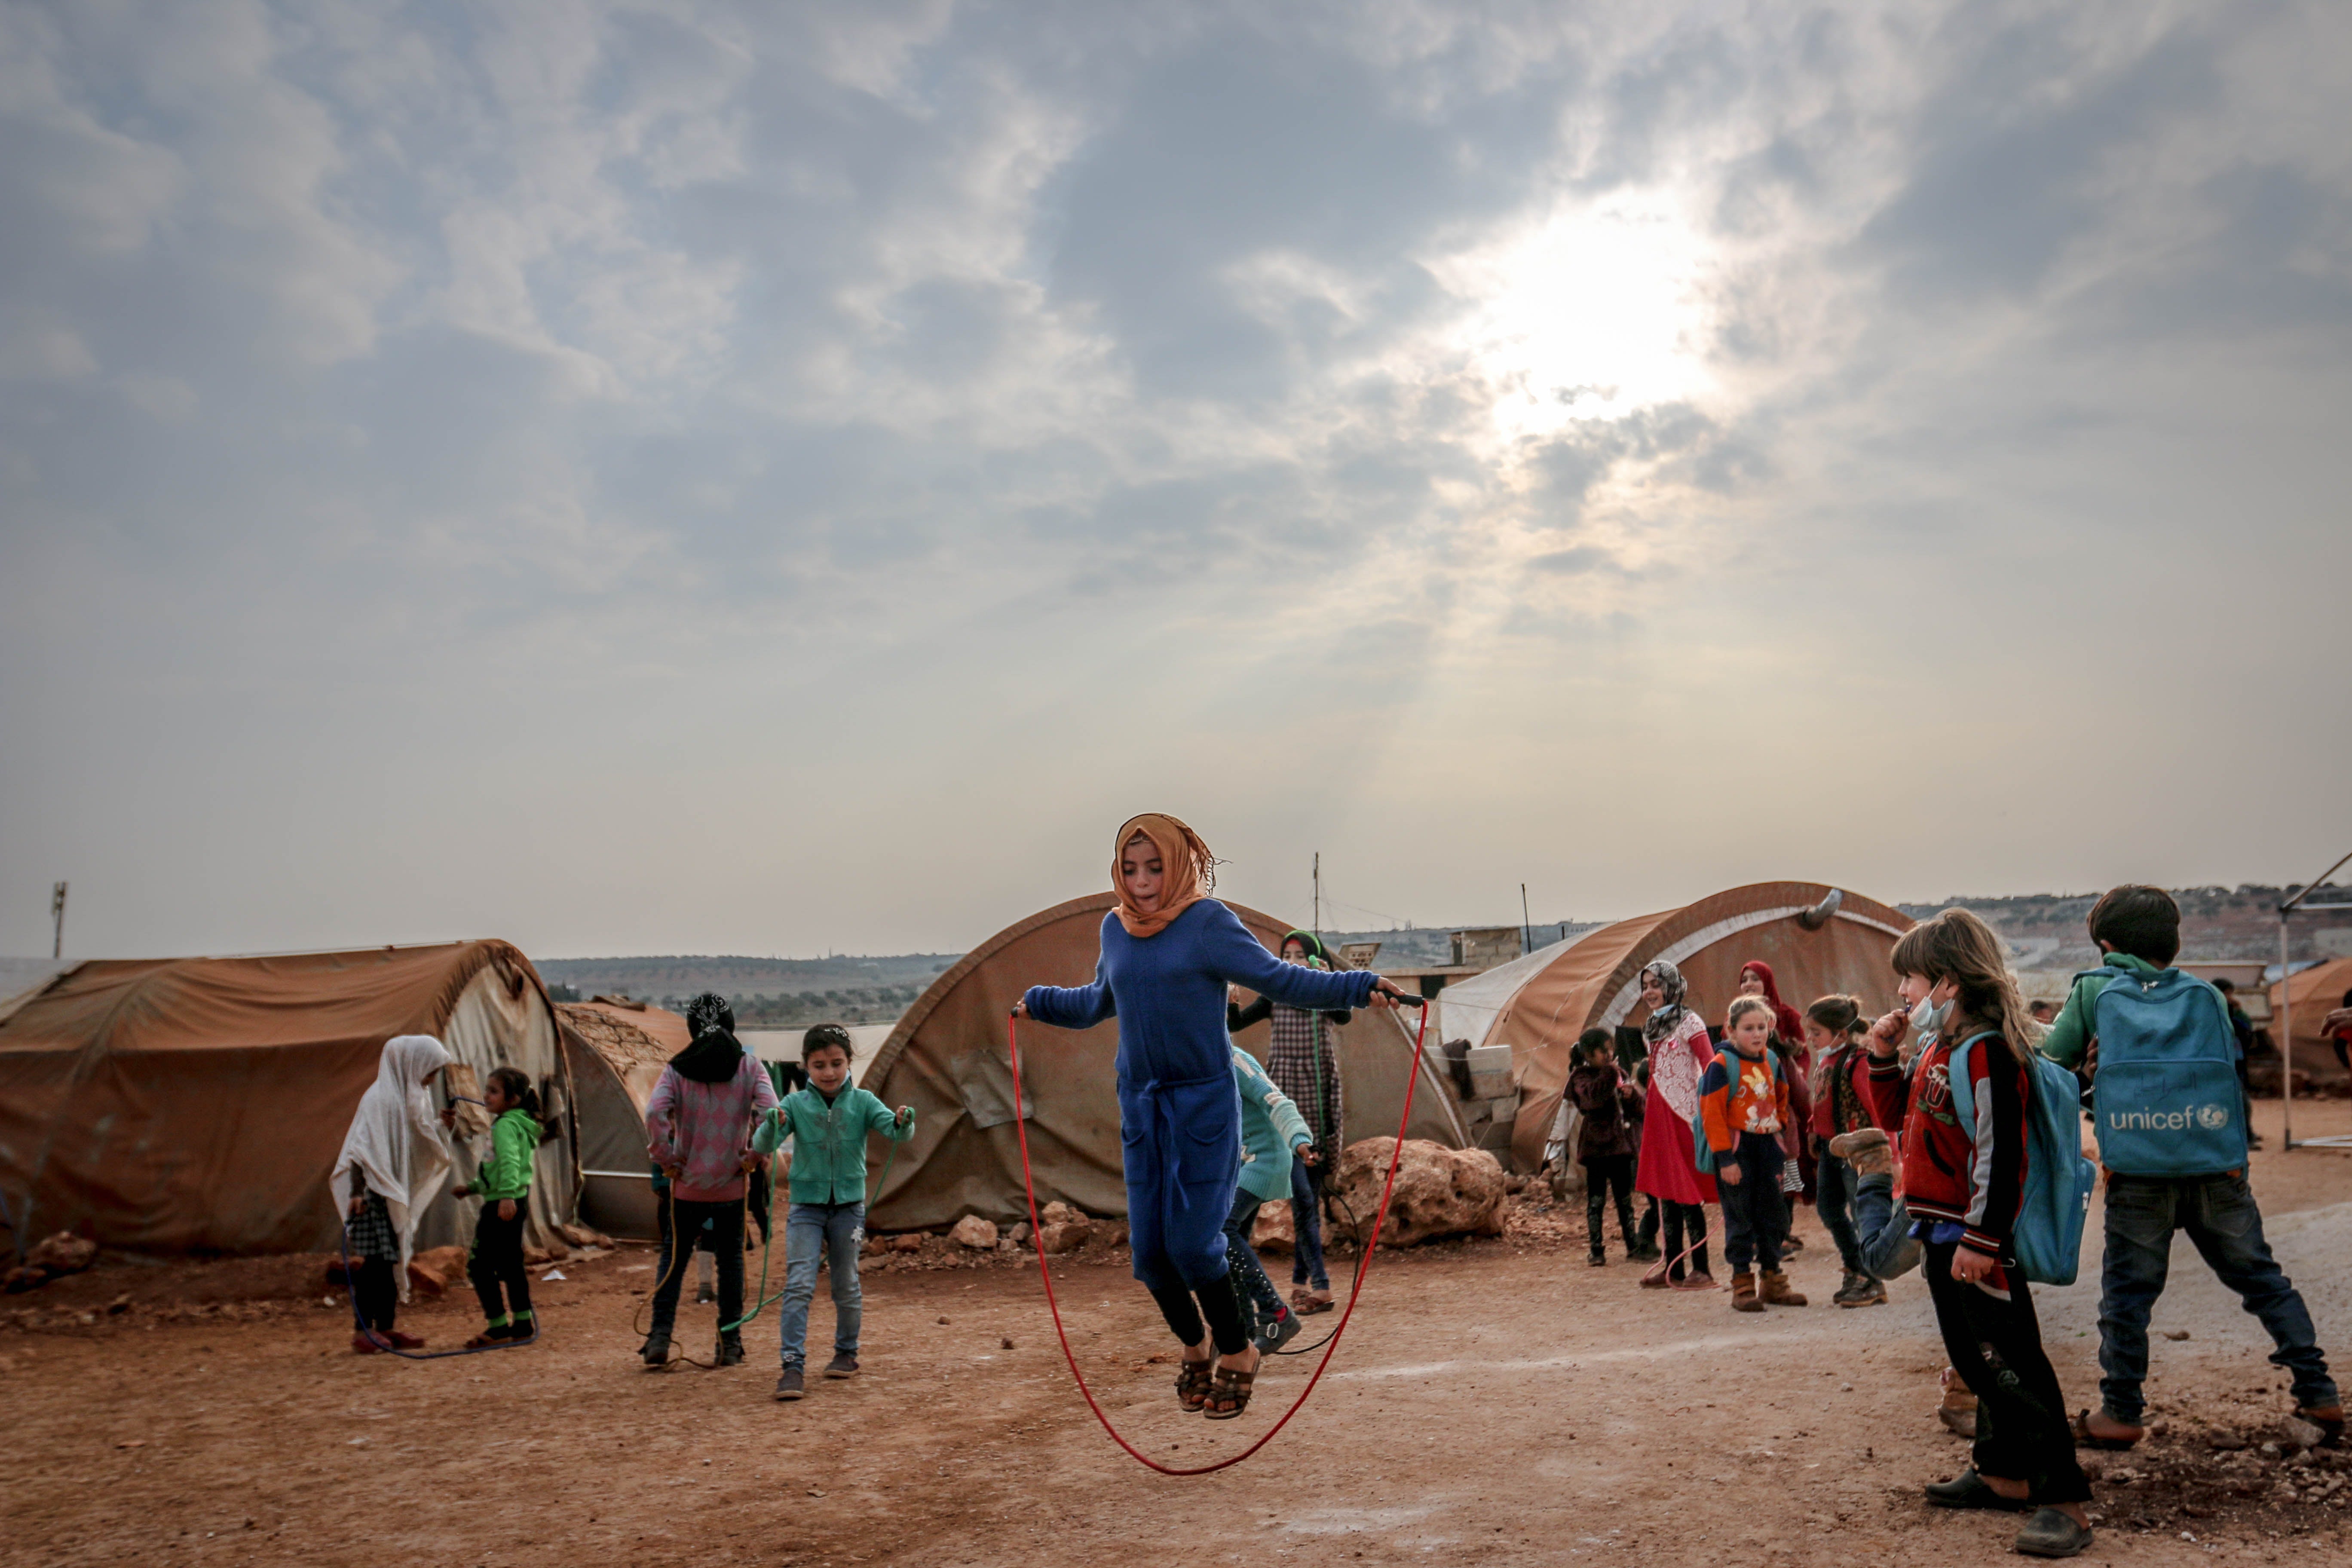 Children jumping rope in Idleb, Idleb Governorate, Syria